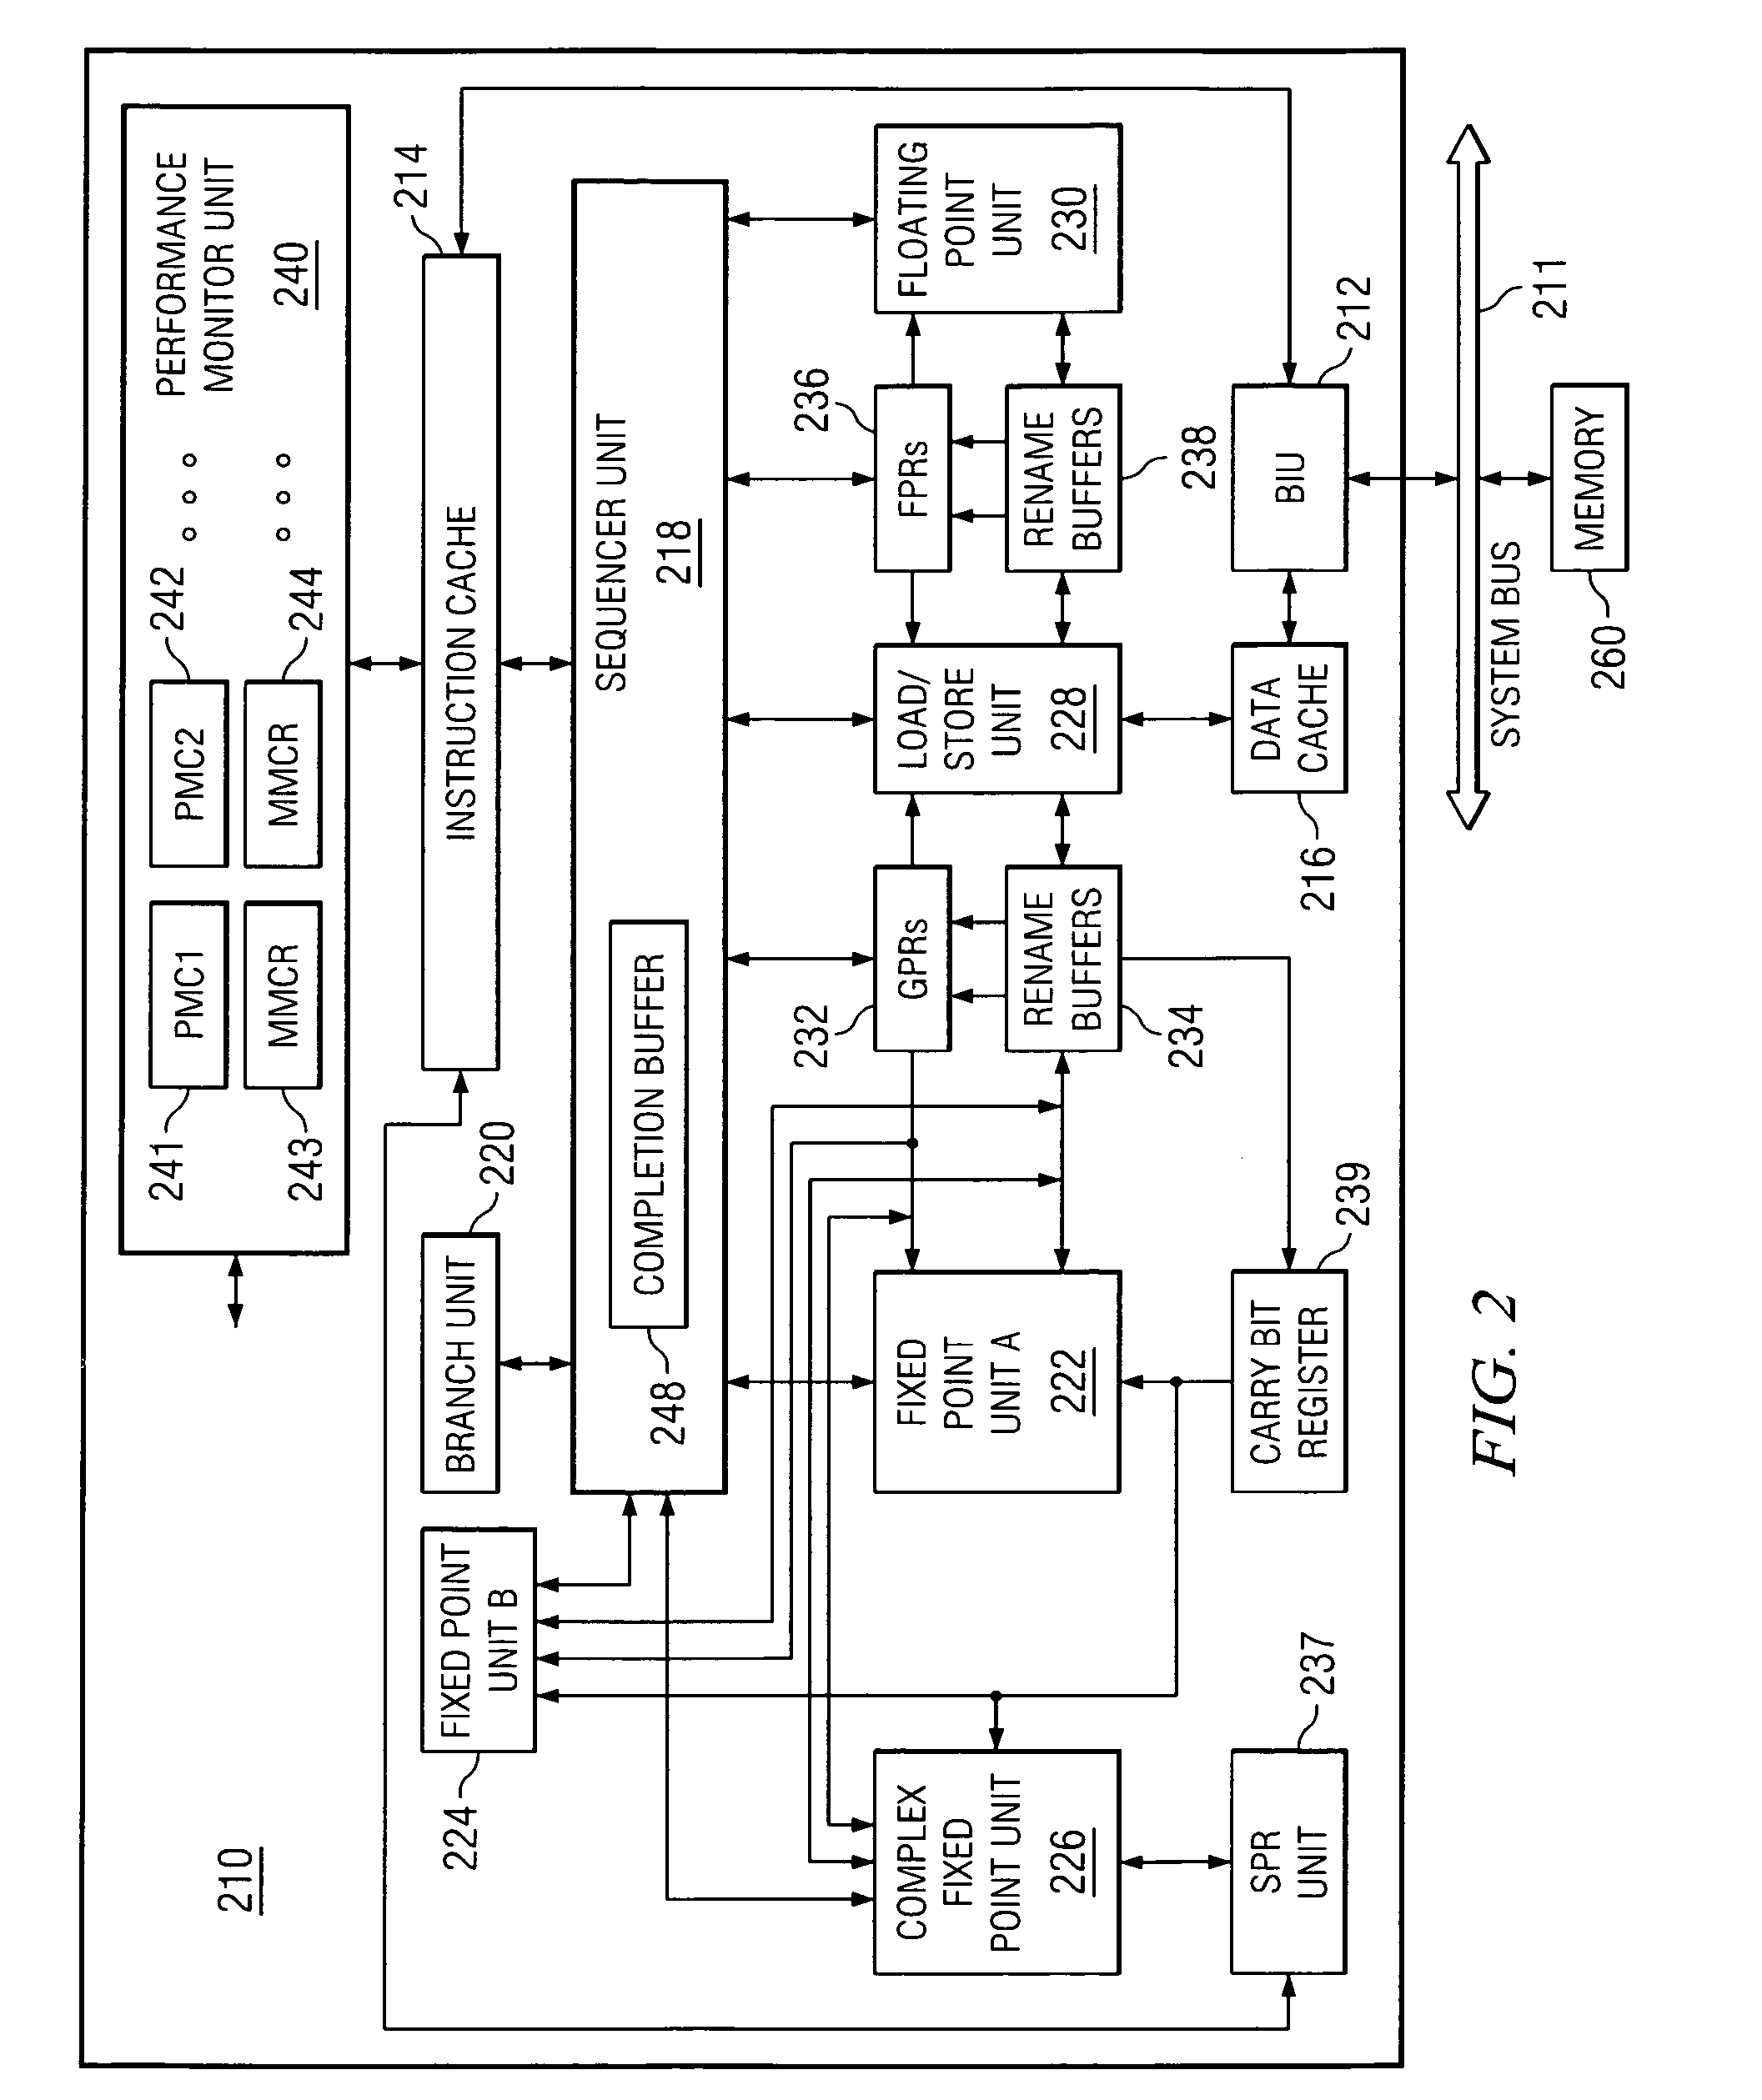 Autonomic method and apparatus for counting branch instructions to generate branch statistics meant to improve branch predictions